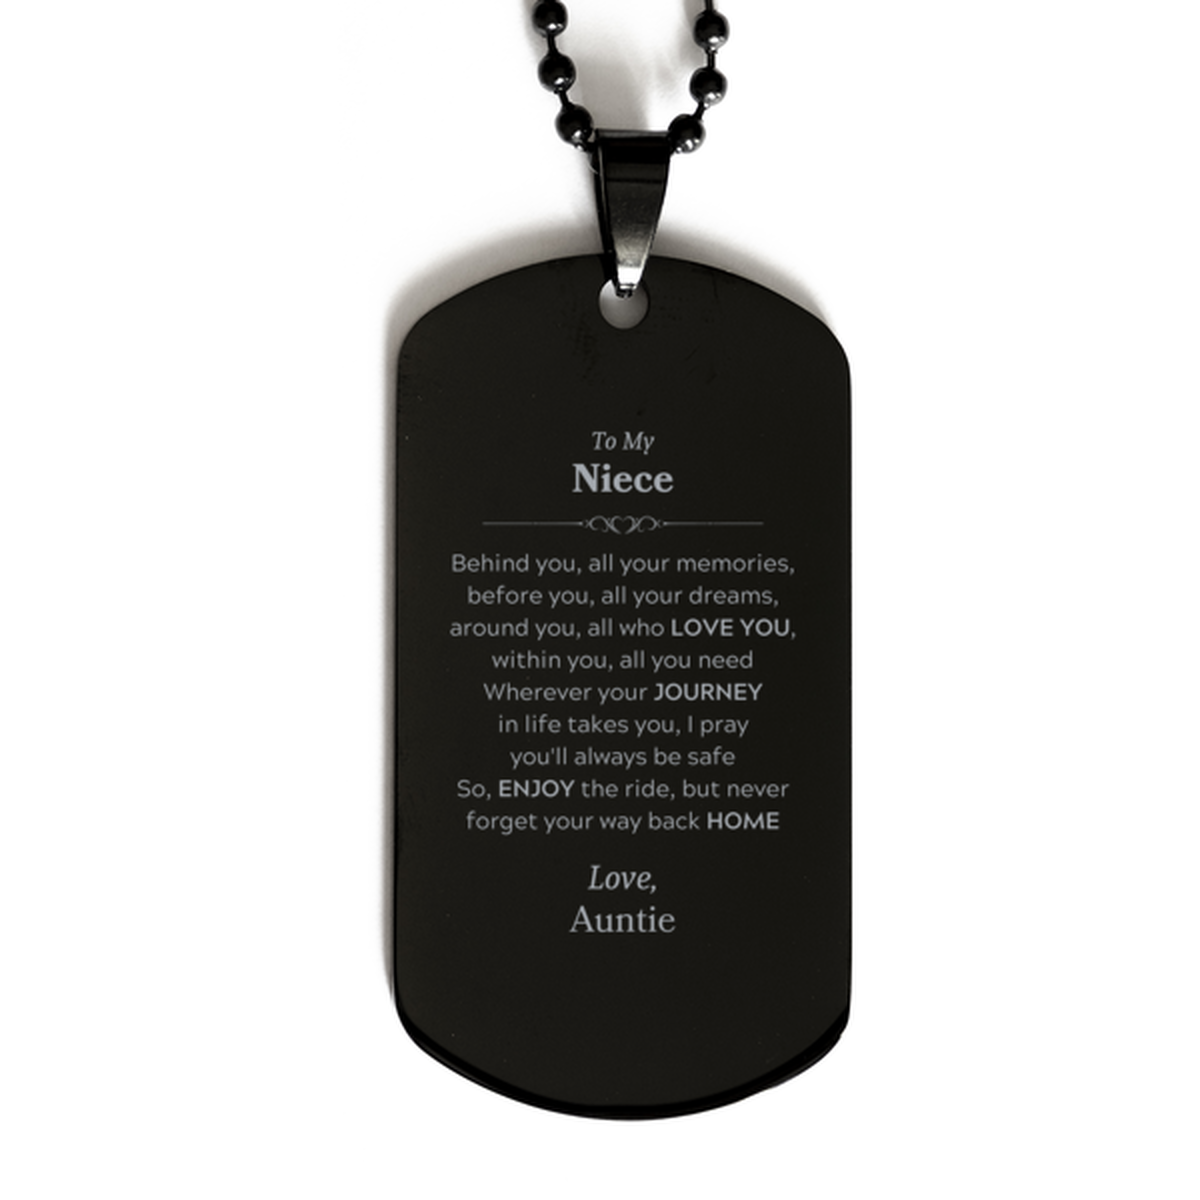 To My Niece Graduation Gifts from Auntie, Niece Black Dog Tag Christmas Birthday Gifts for Niece Behind you, all your memories, before you, all your dreams. Love, Auntie